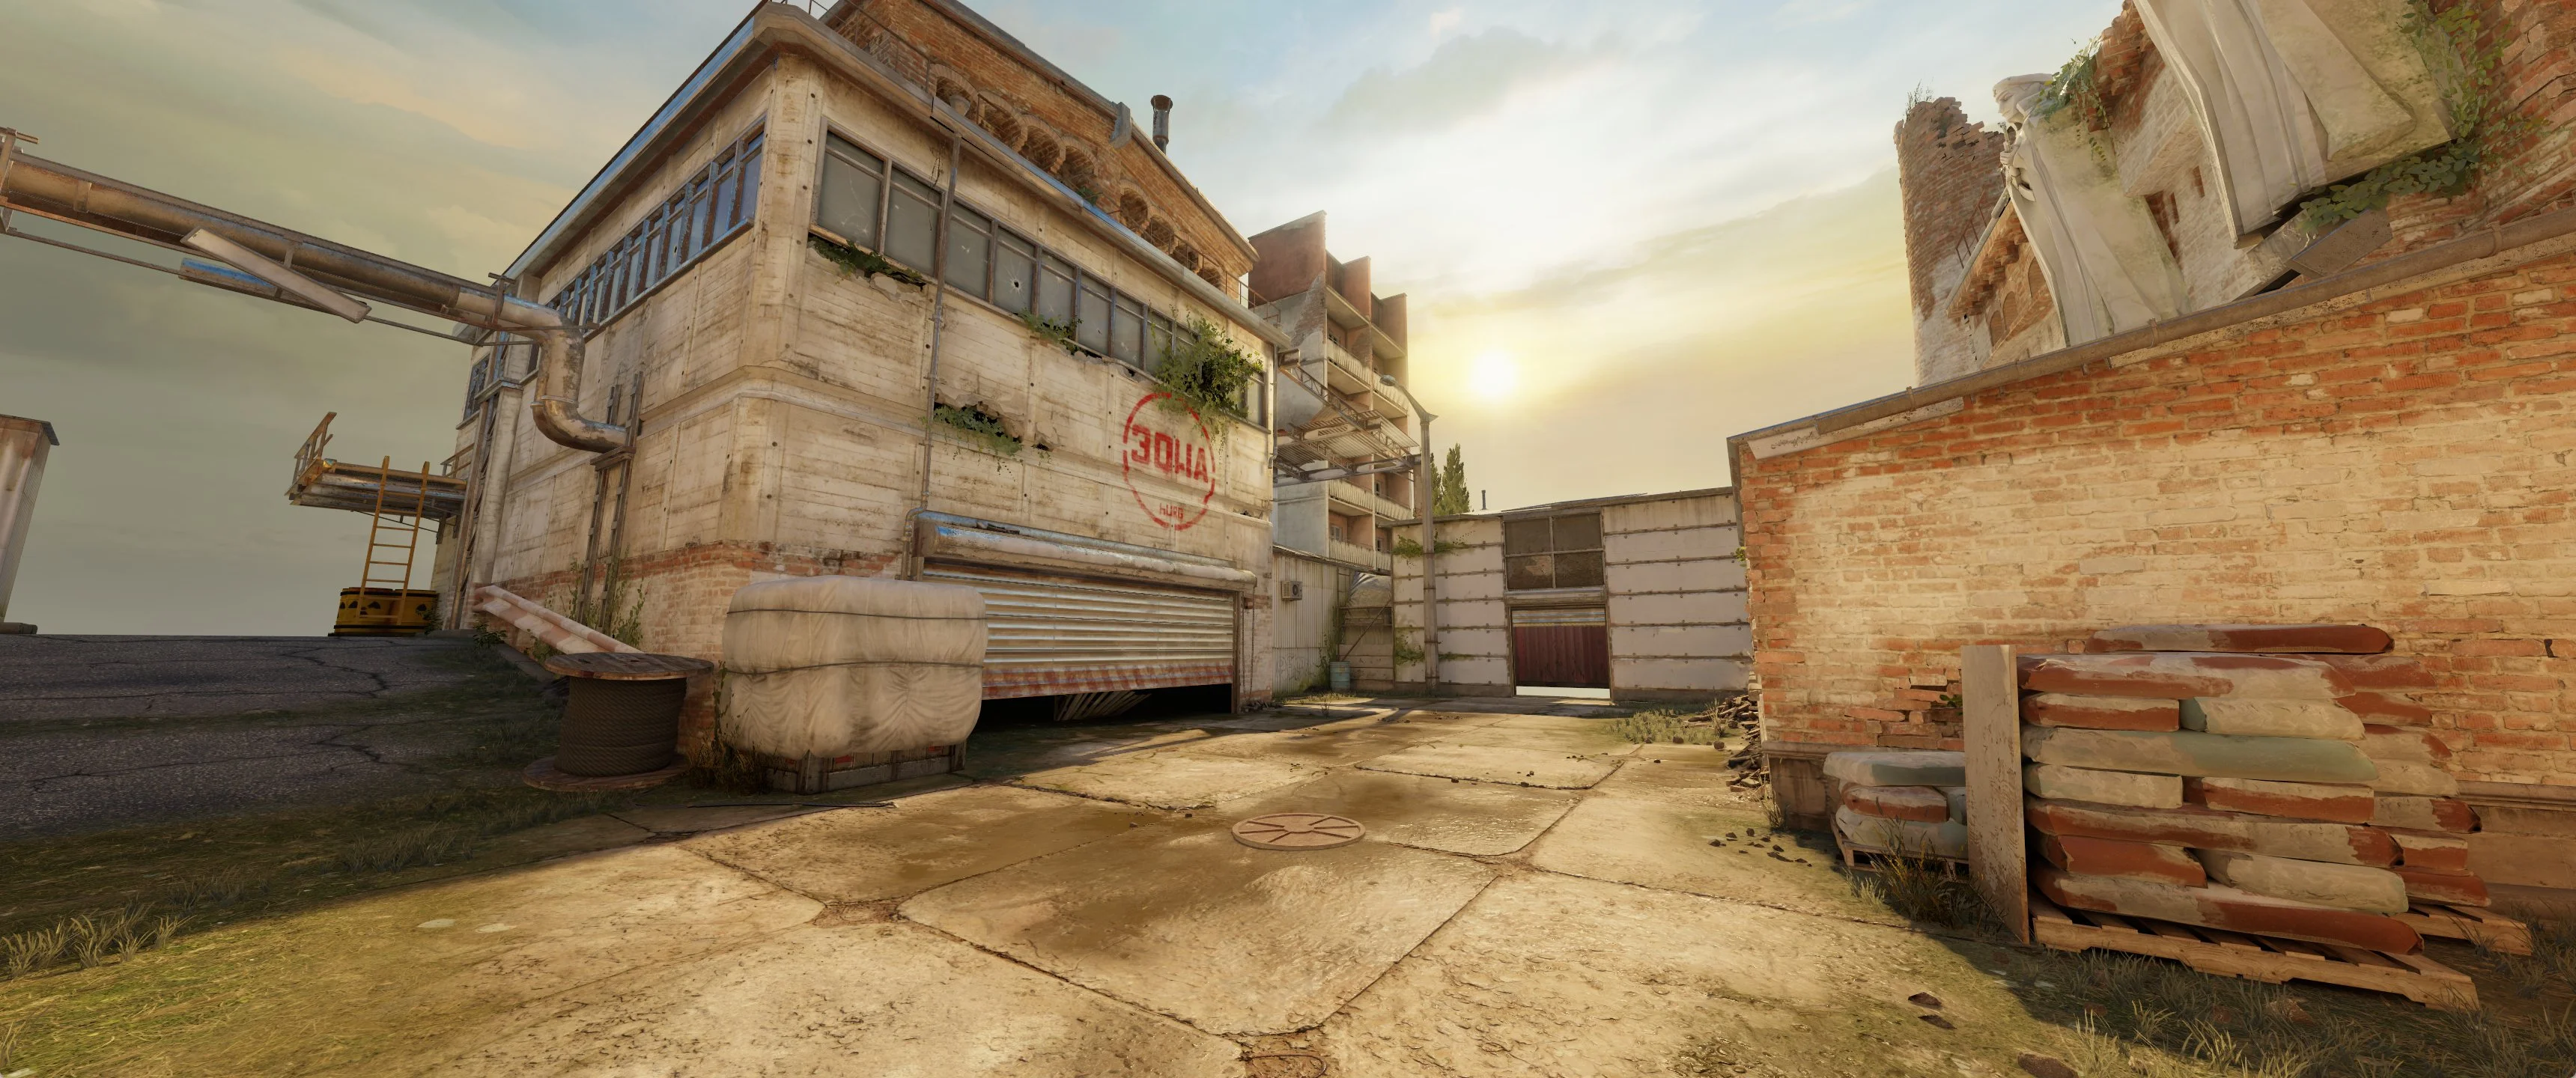 Screenshots of a remake of a map from CS:GO were posted online